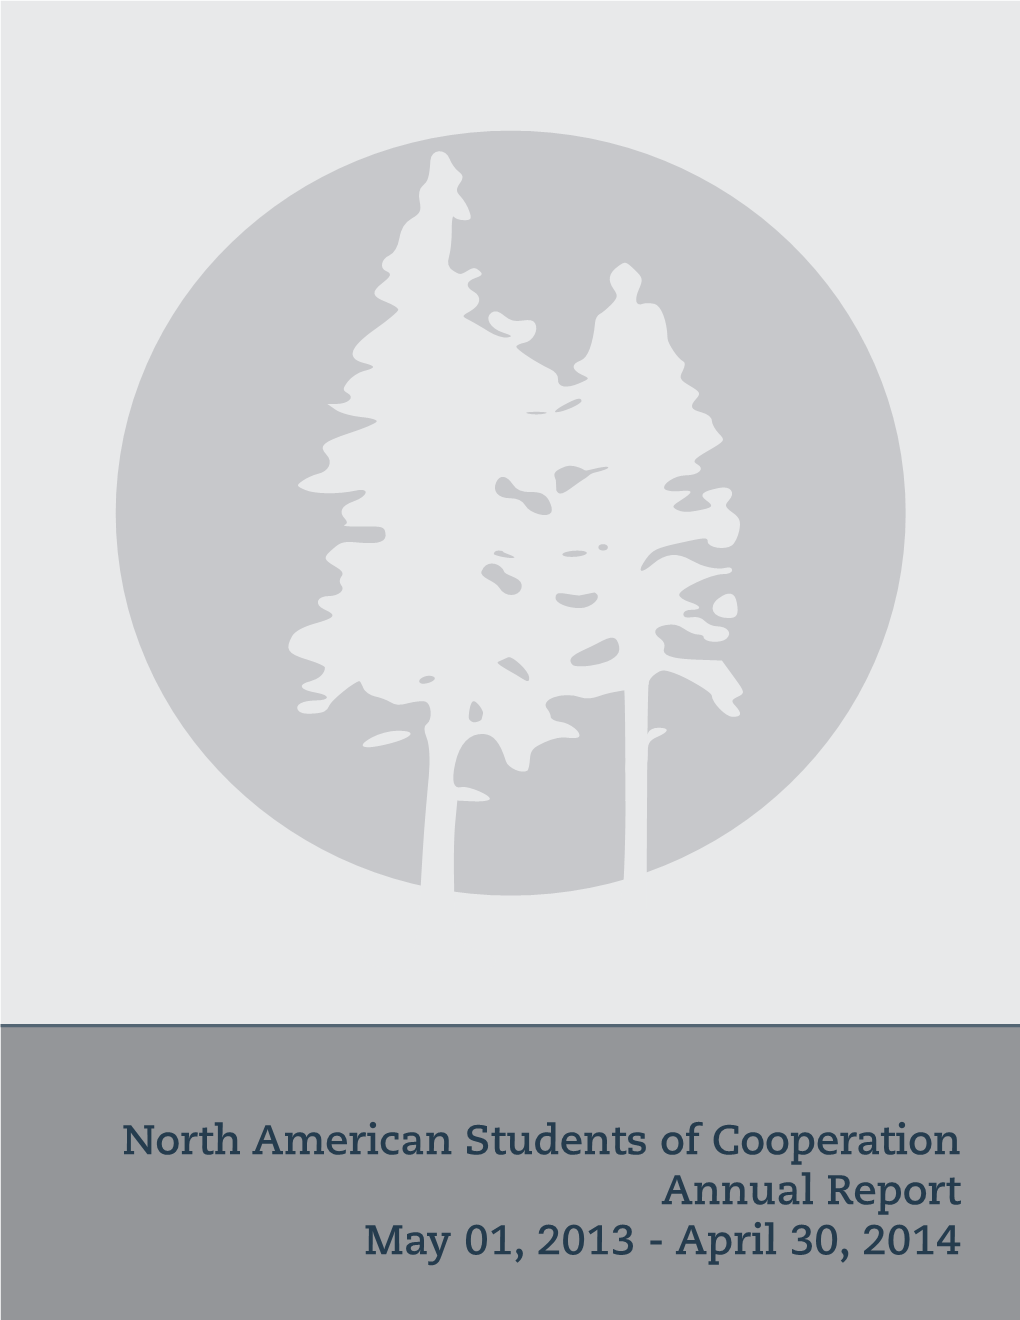 North American Students of Cooperation Annual Report May 01, 2013 - April 30, 2014 Table of Contents